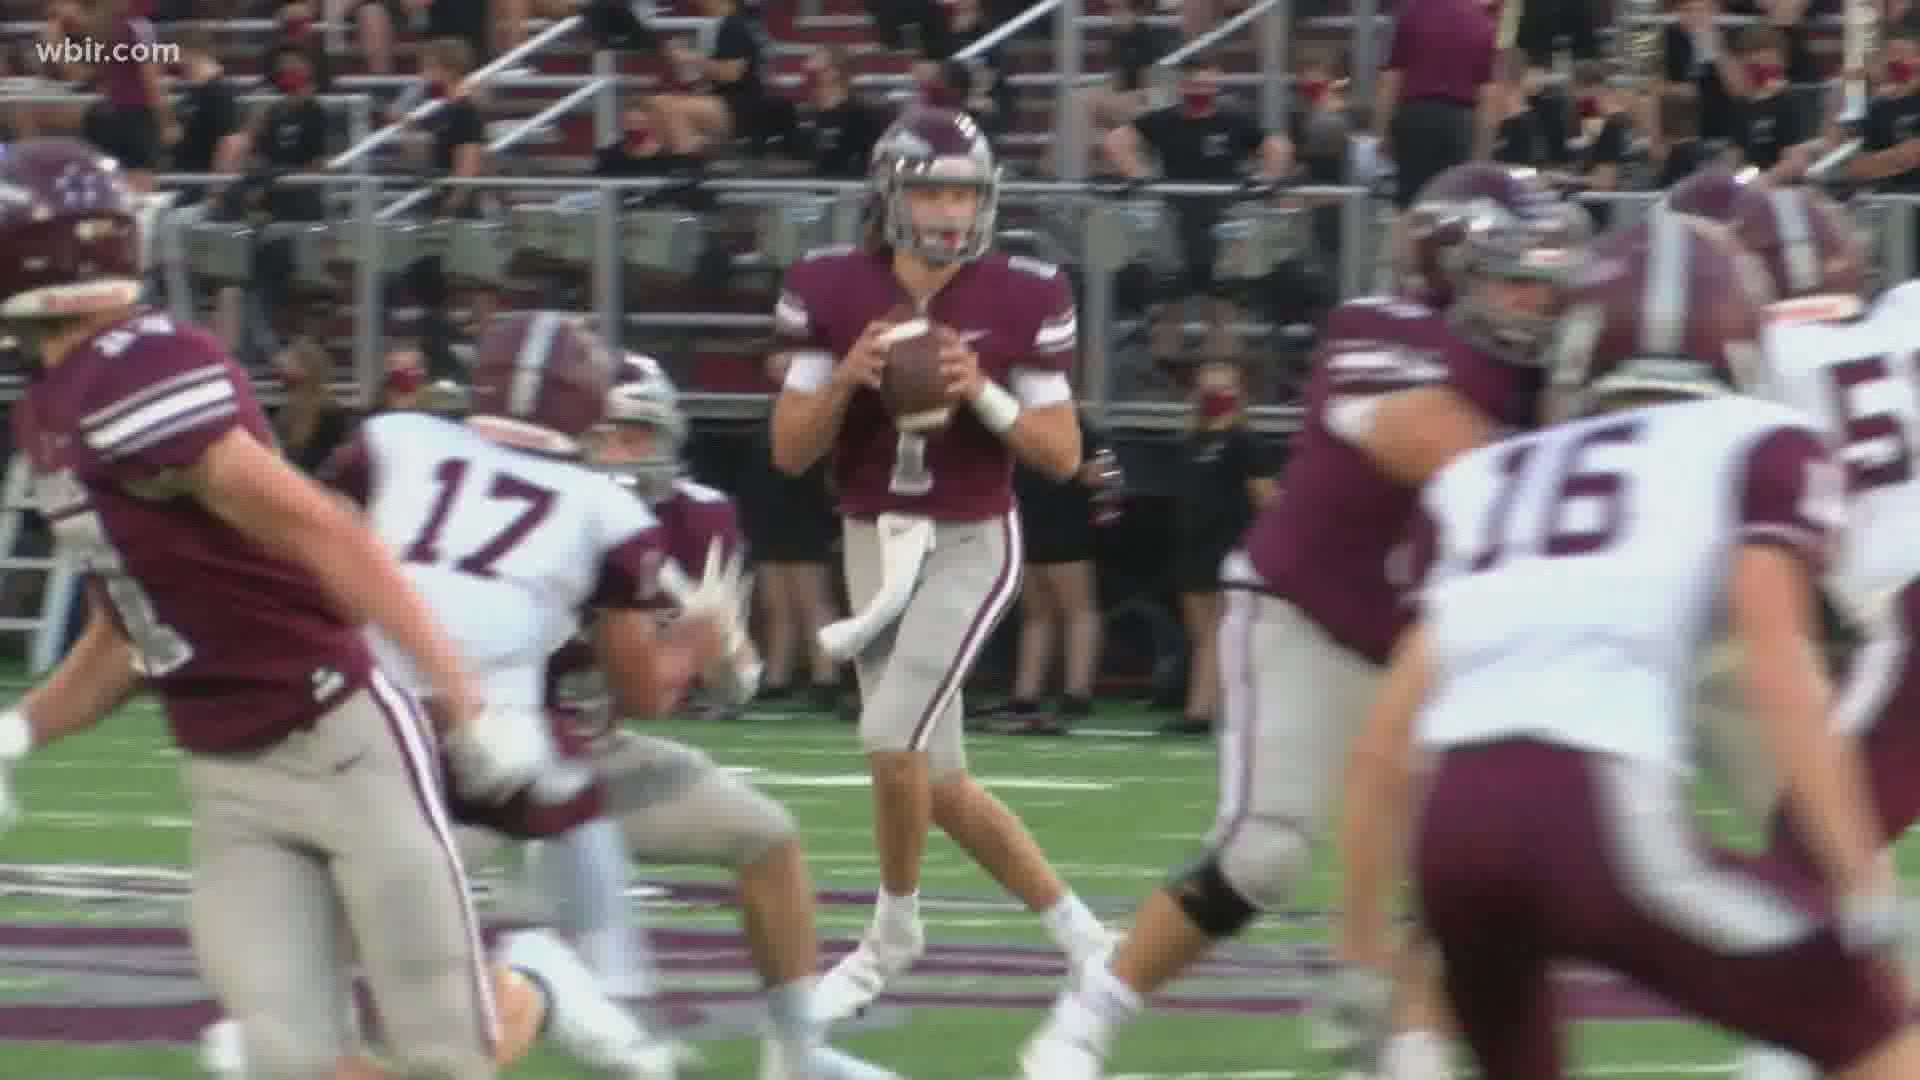 Bearden falls to Dobyns-Bennett in its first game of the season.